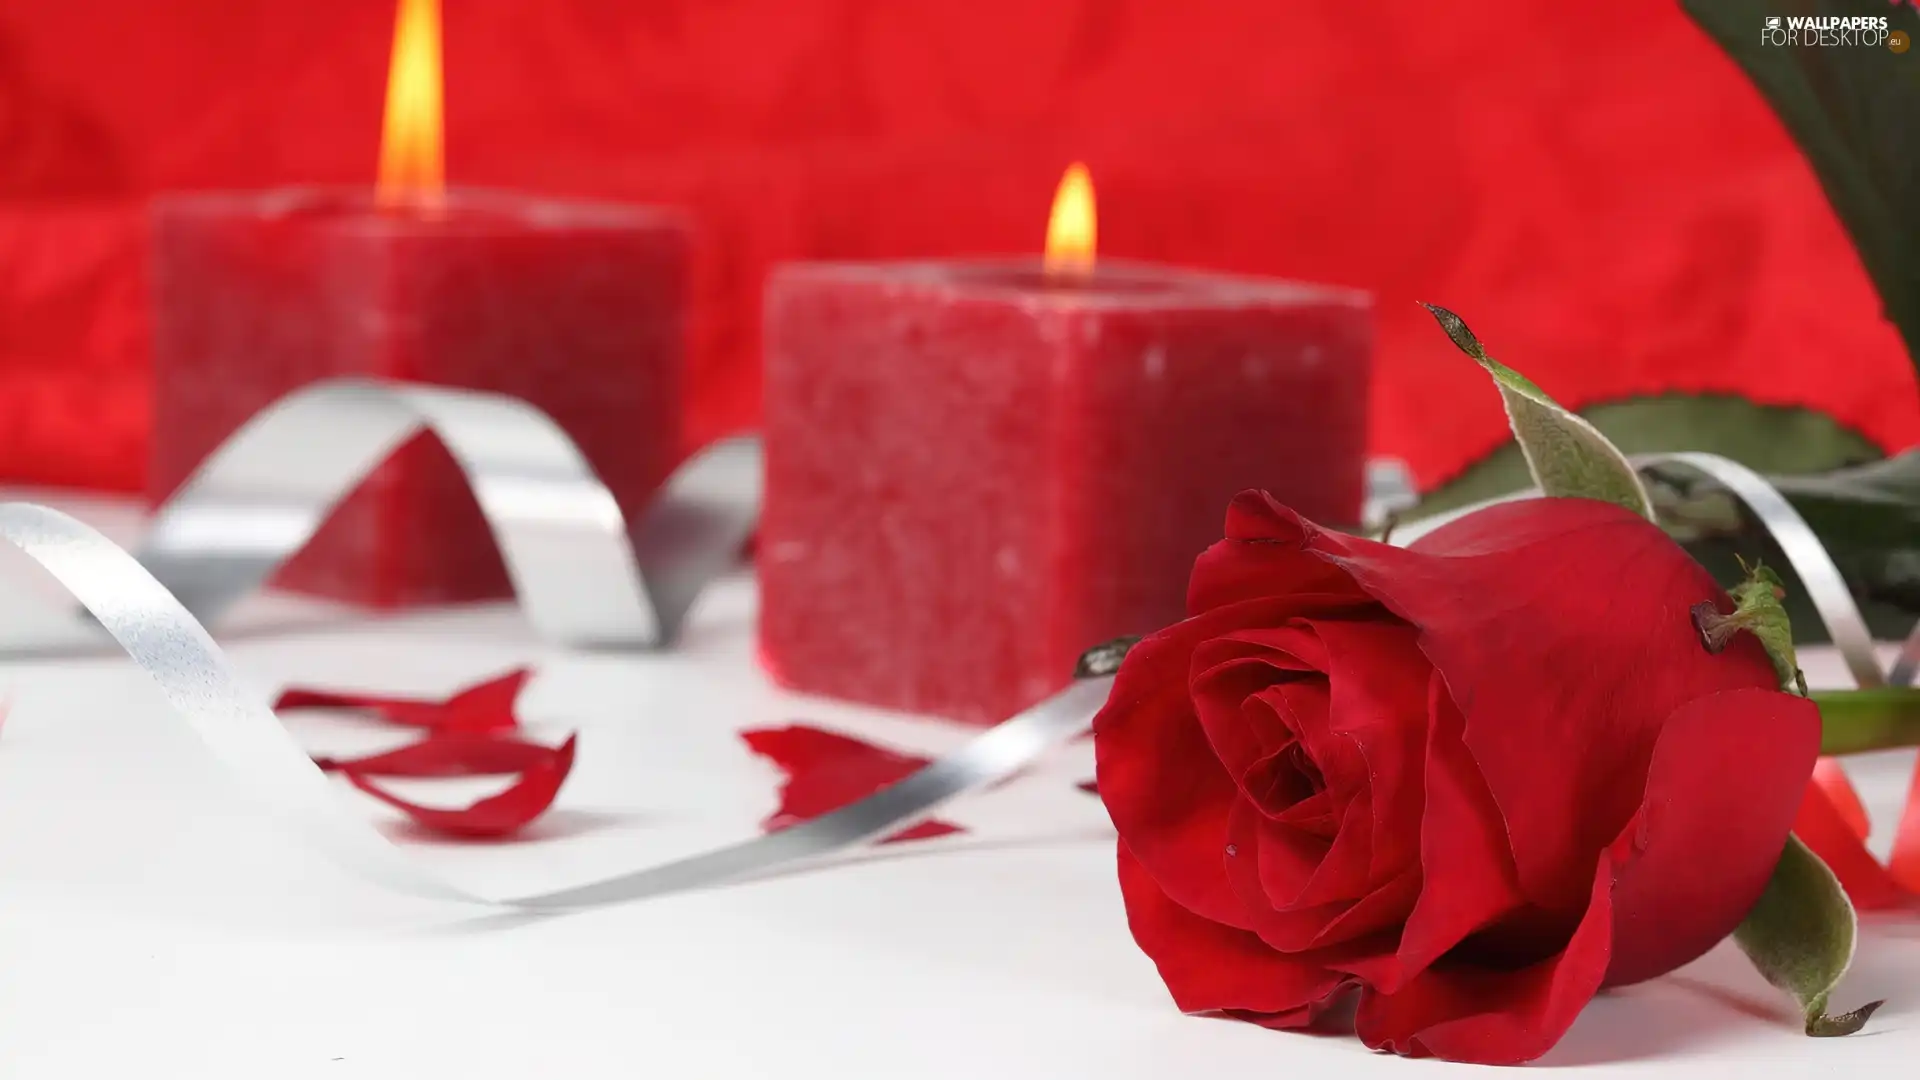 ribbon, Candles, rose, flakes, red hot